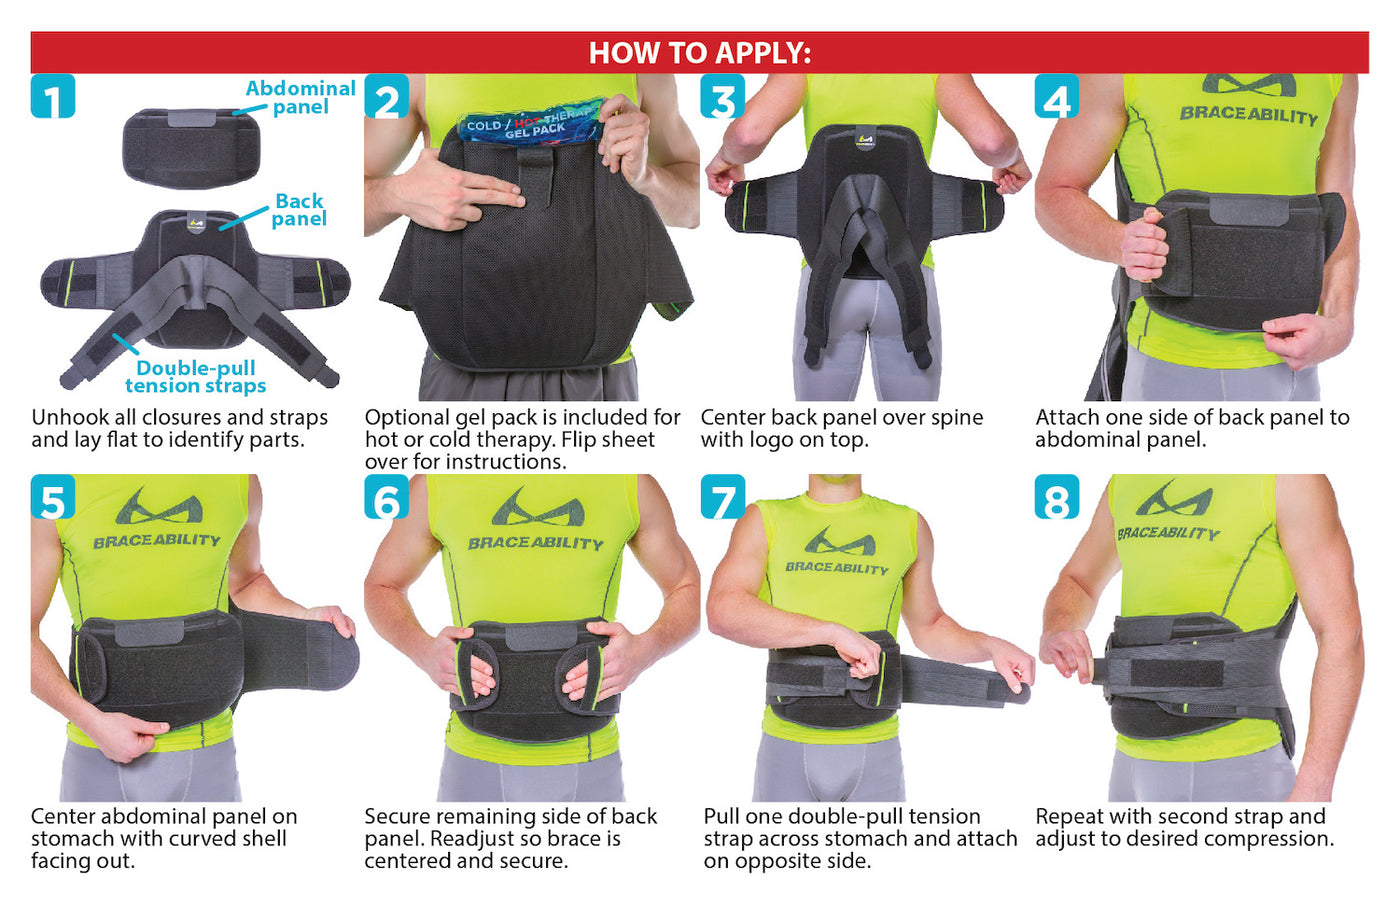 How to put on the spine support LSO back brace instruction sheet